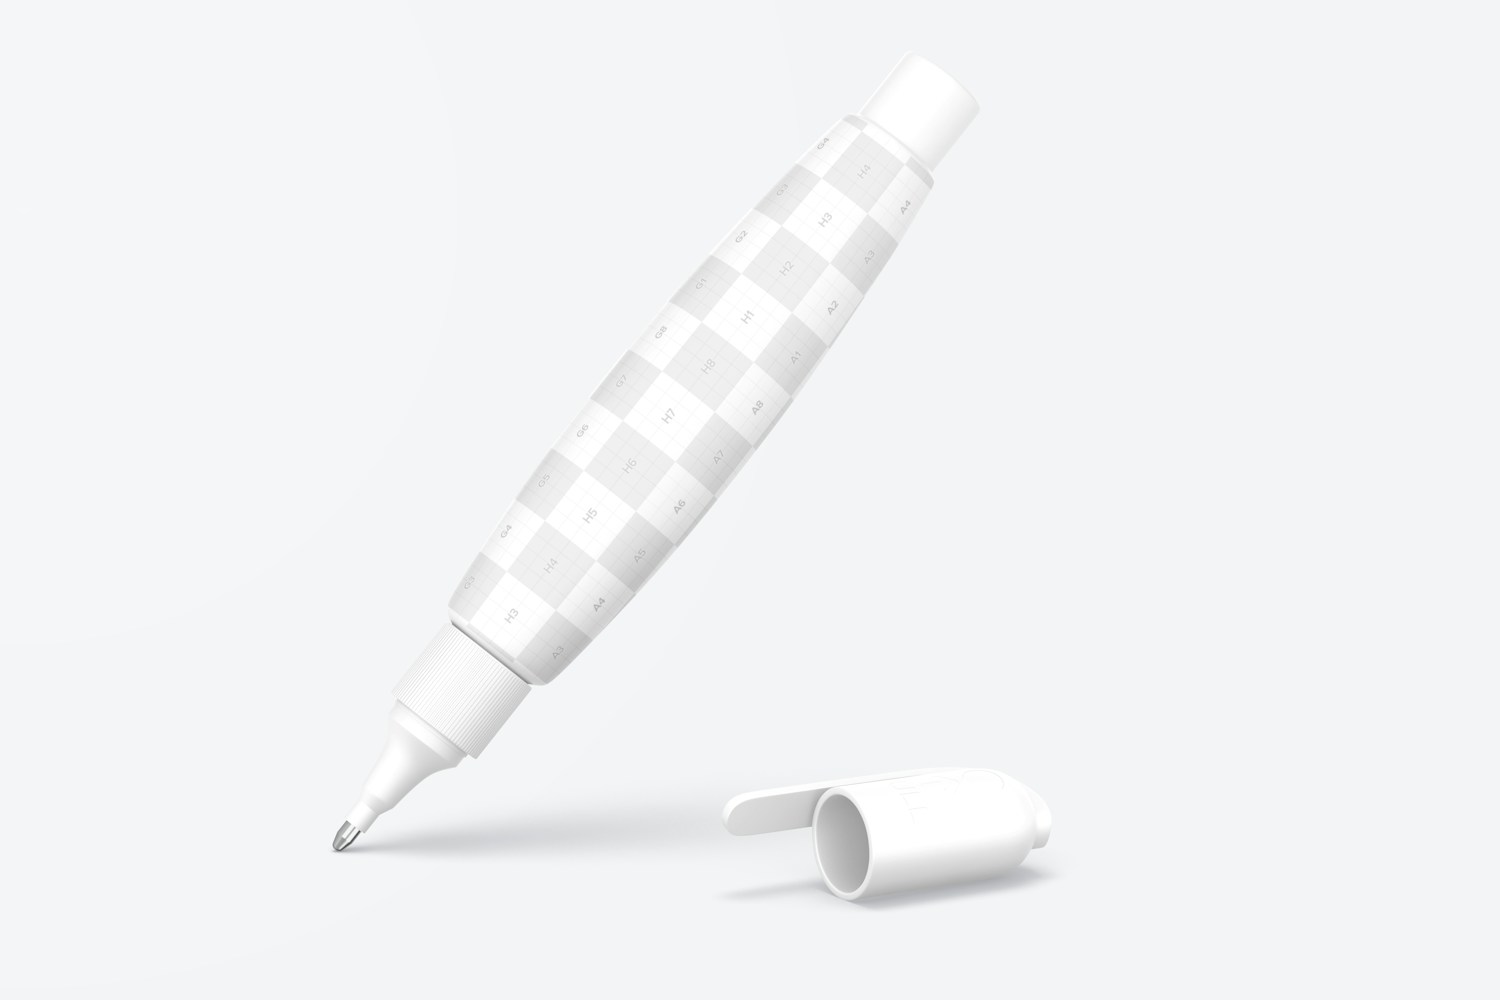 Correction Pen Mockup, Front View